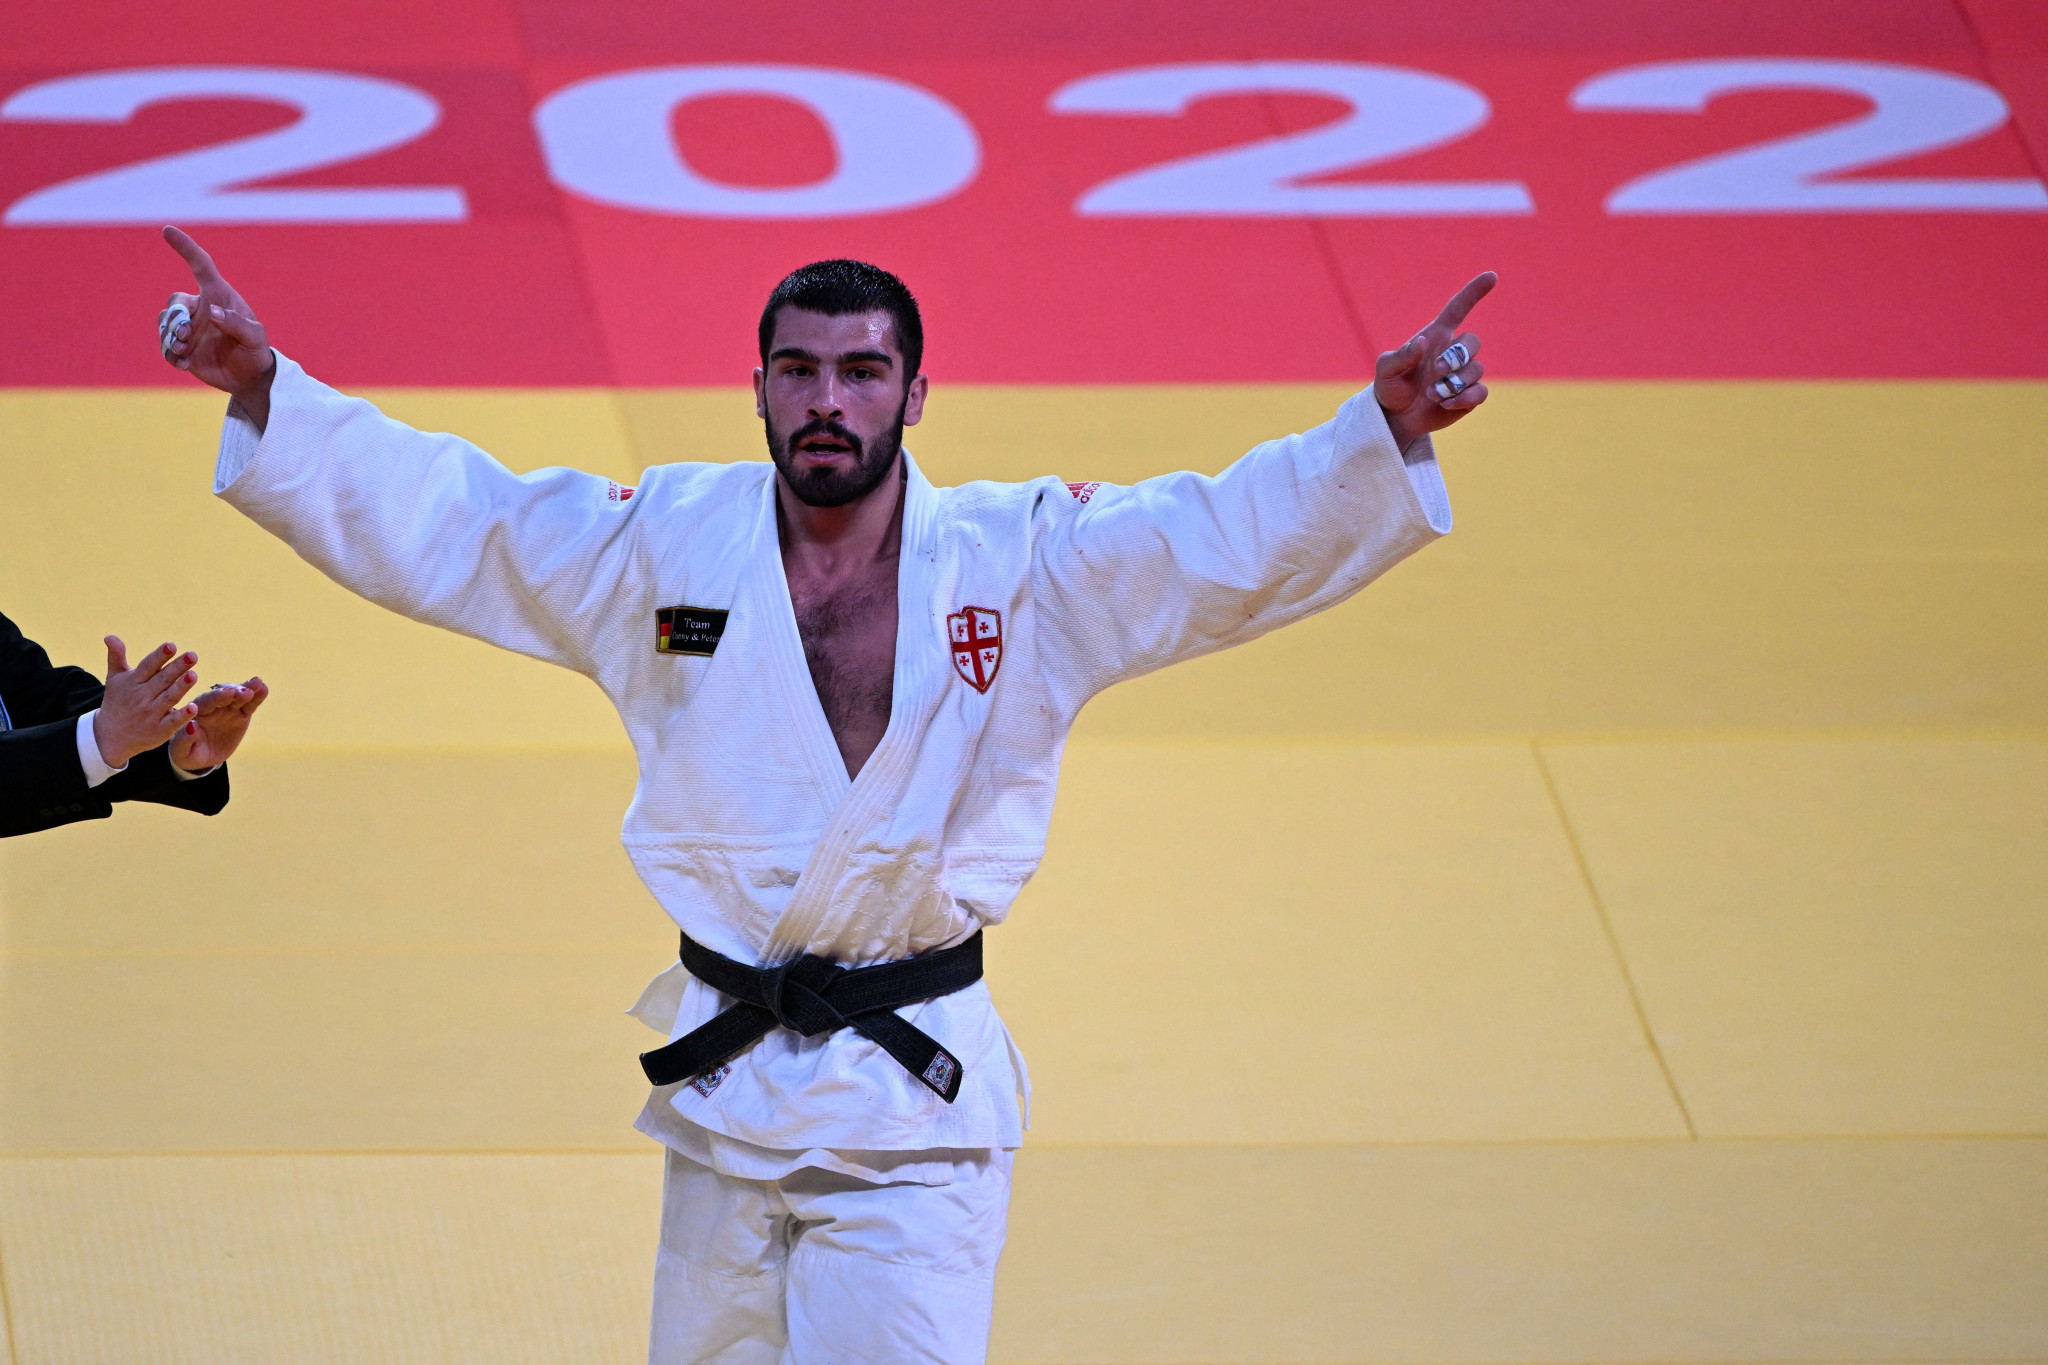 World Judo Championships Opening Ceremony takes place before thrilling finals